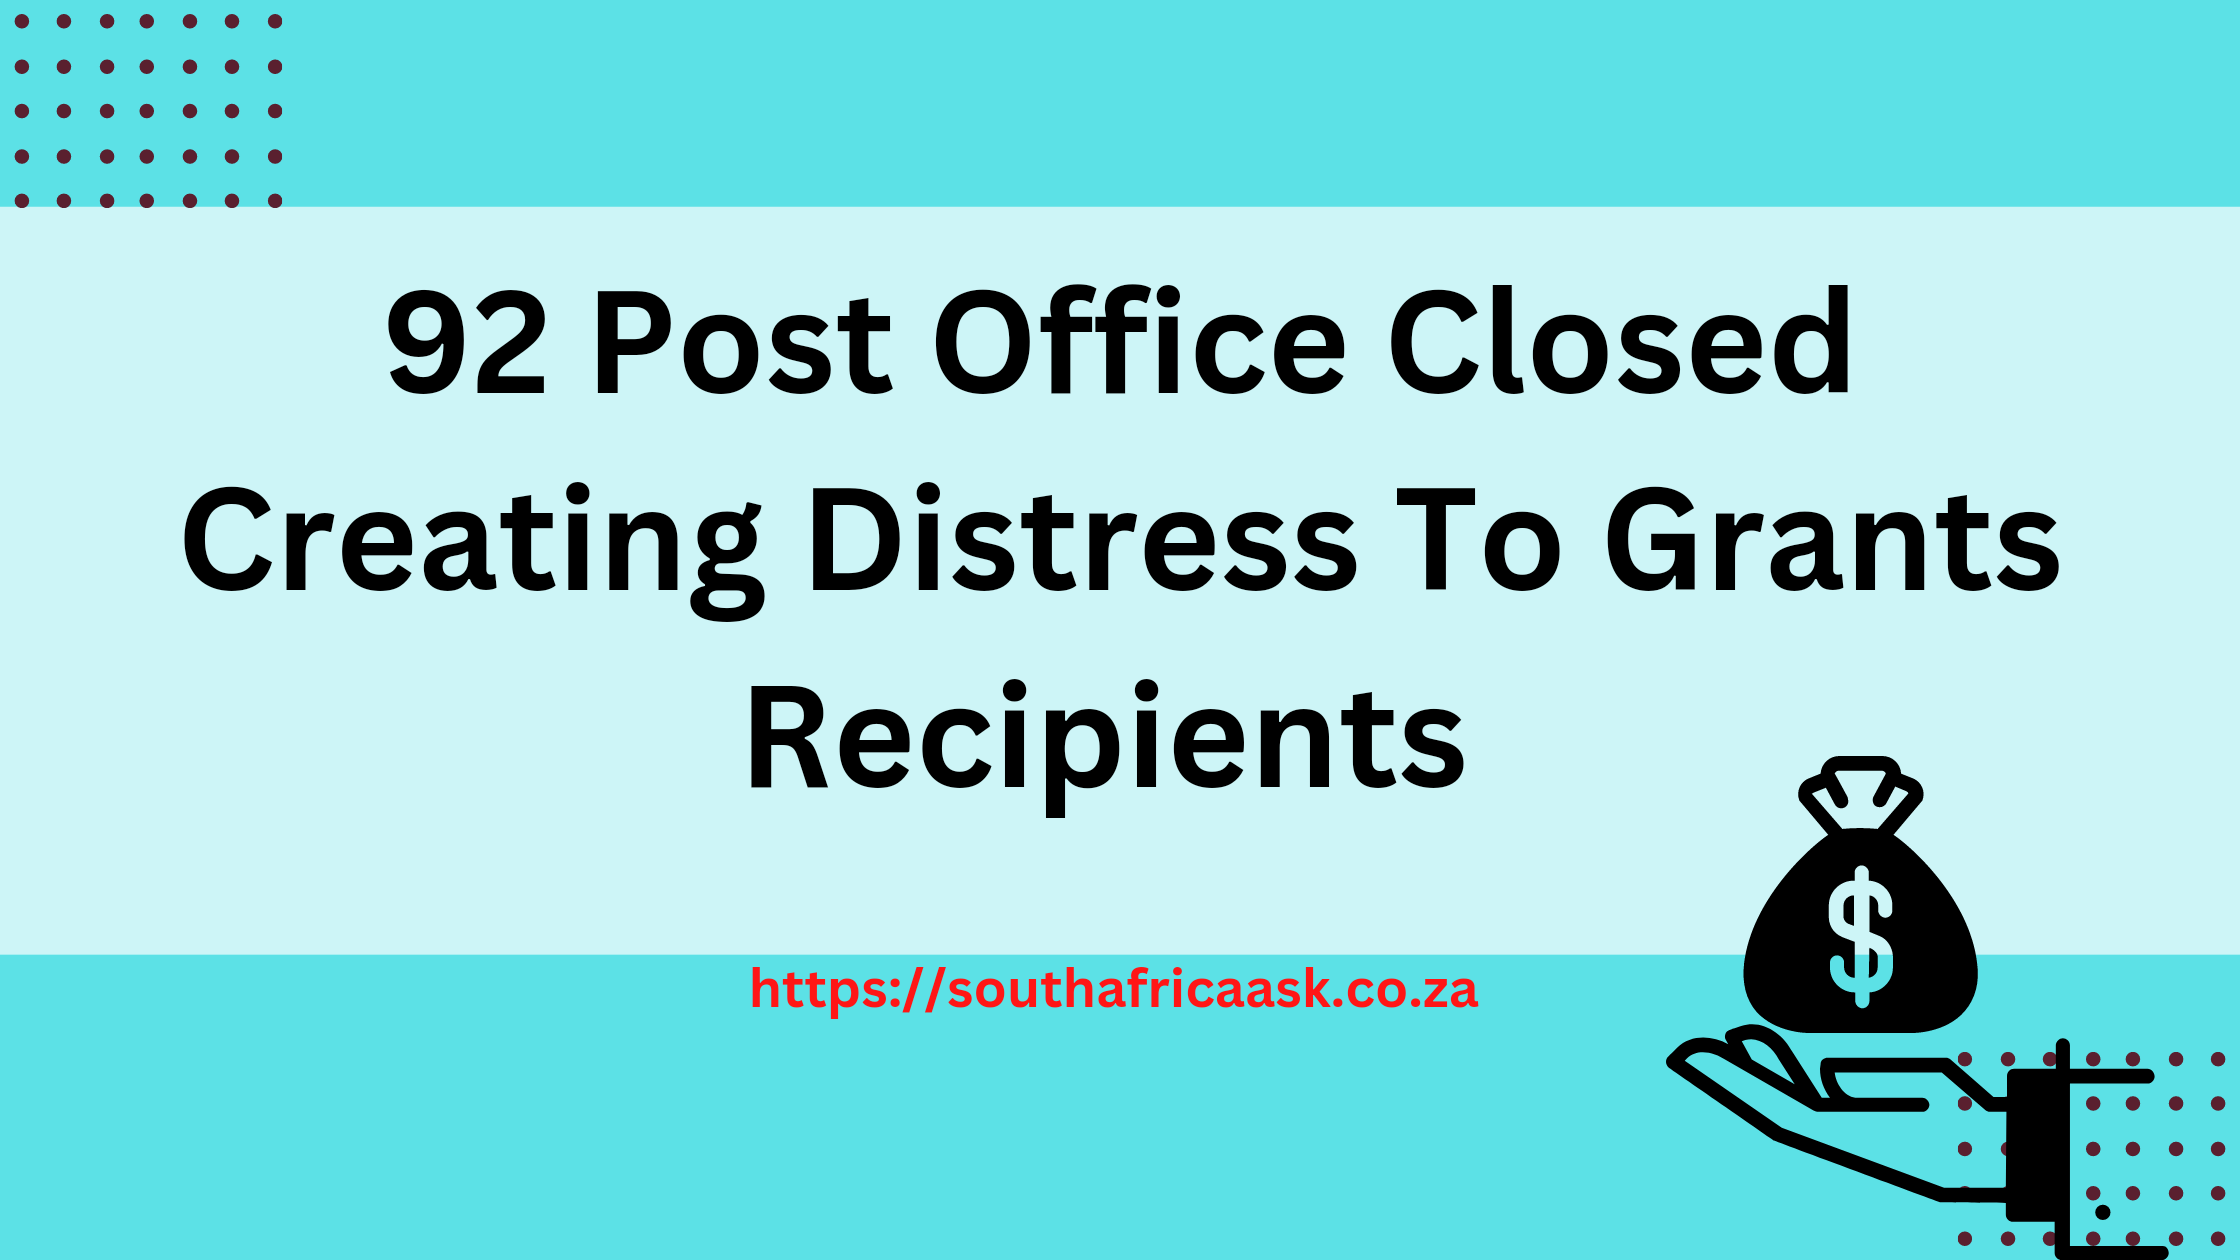 92 Post Office Closed Creating Distress To Grants Recipients